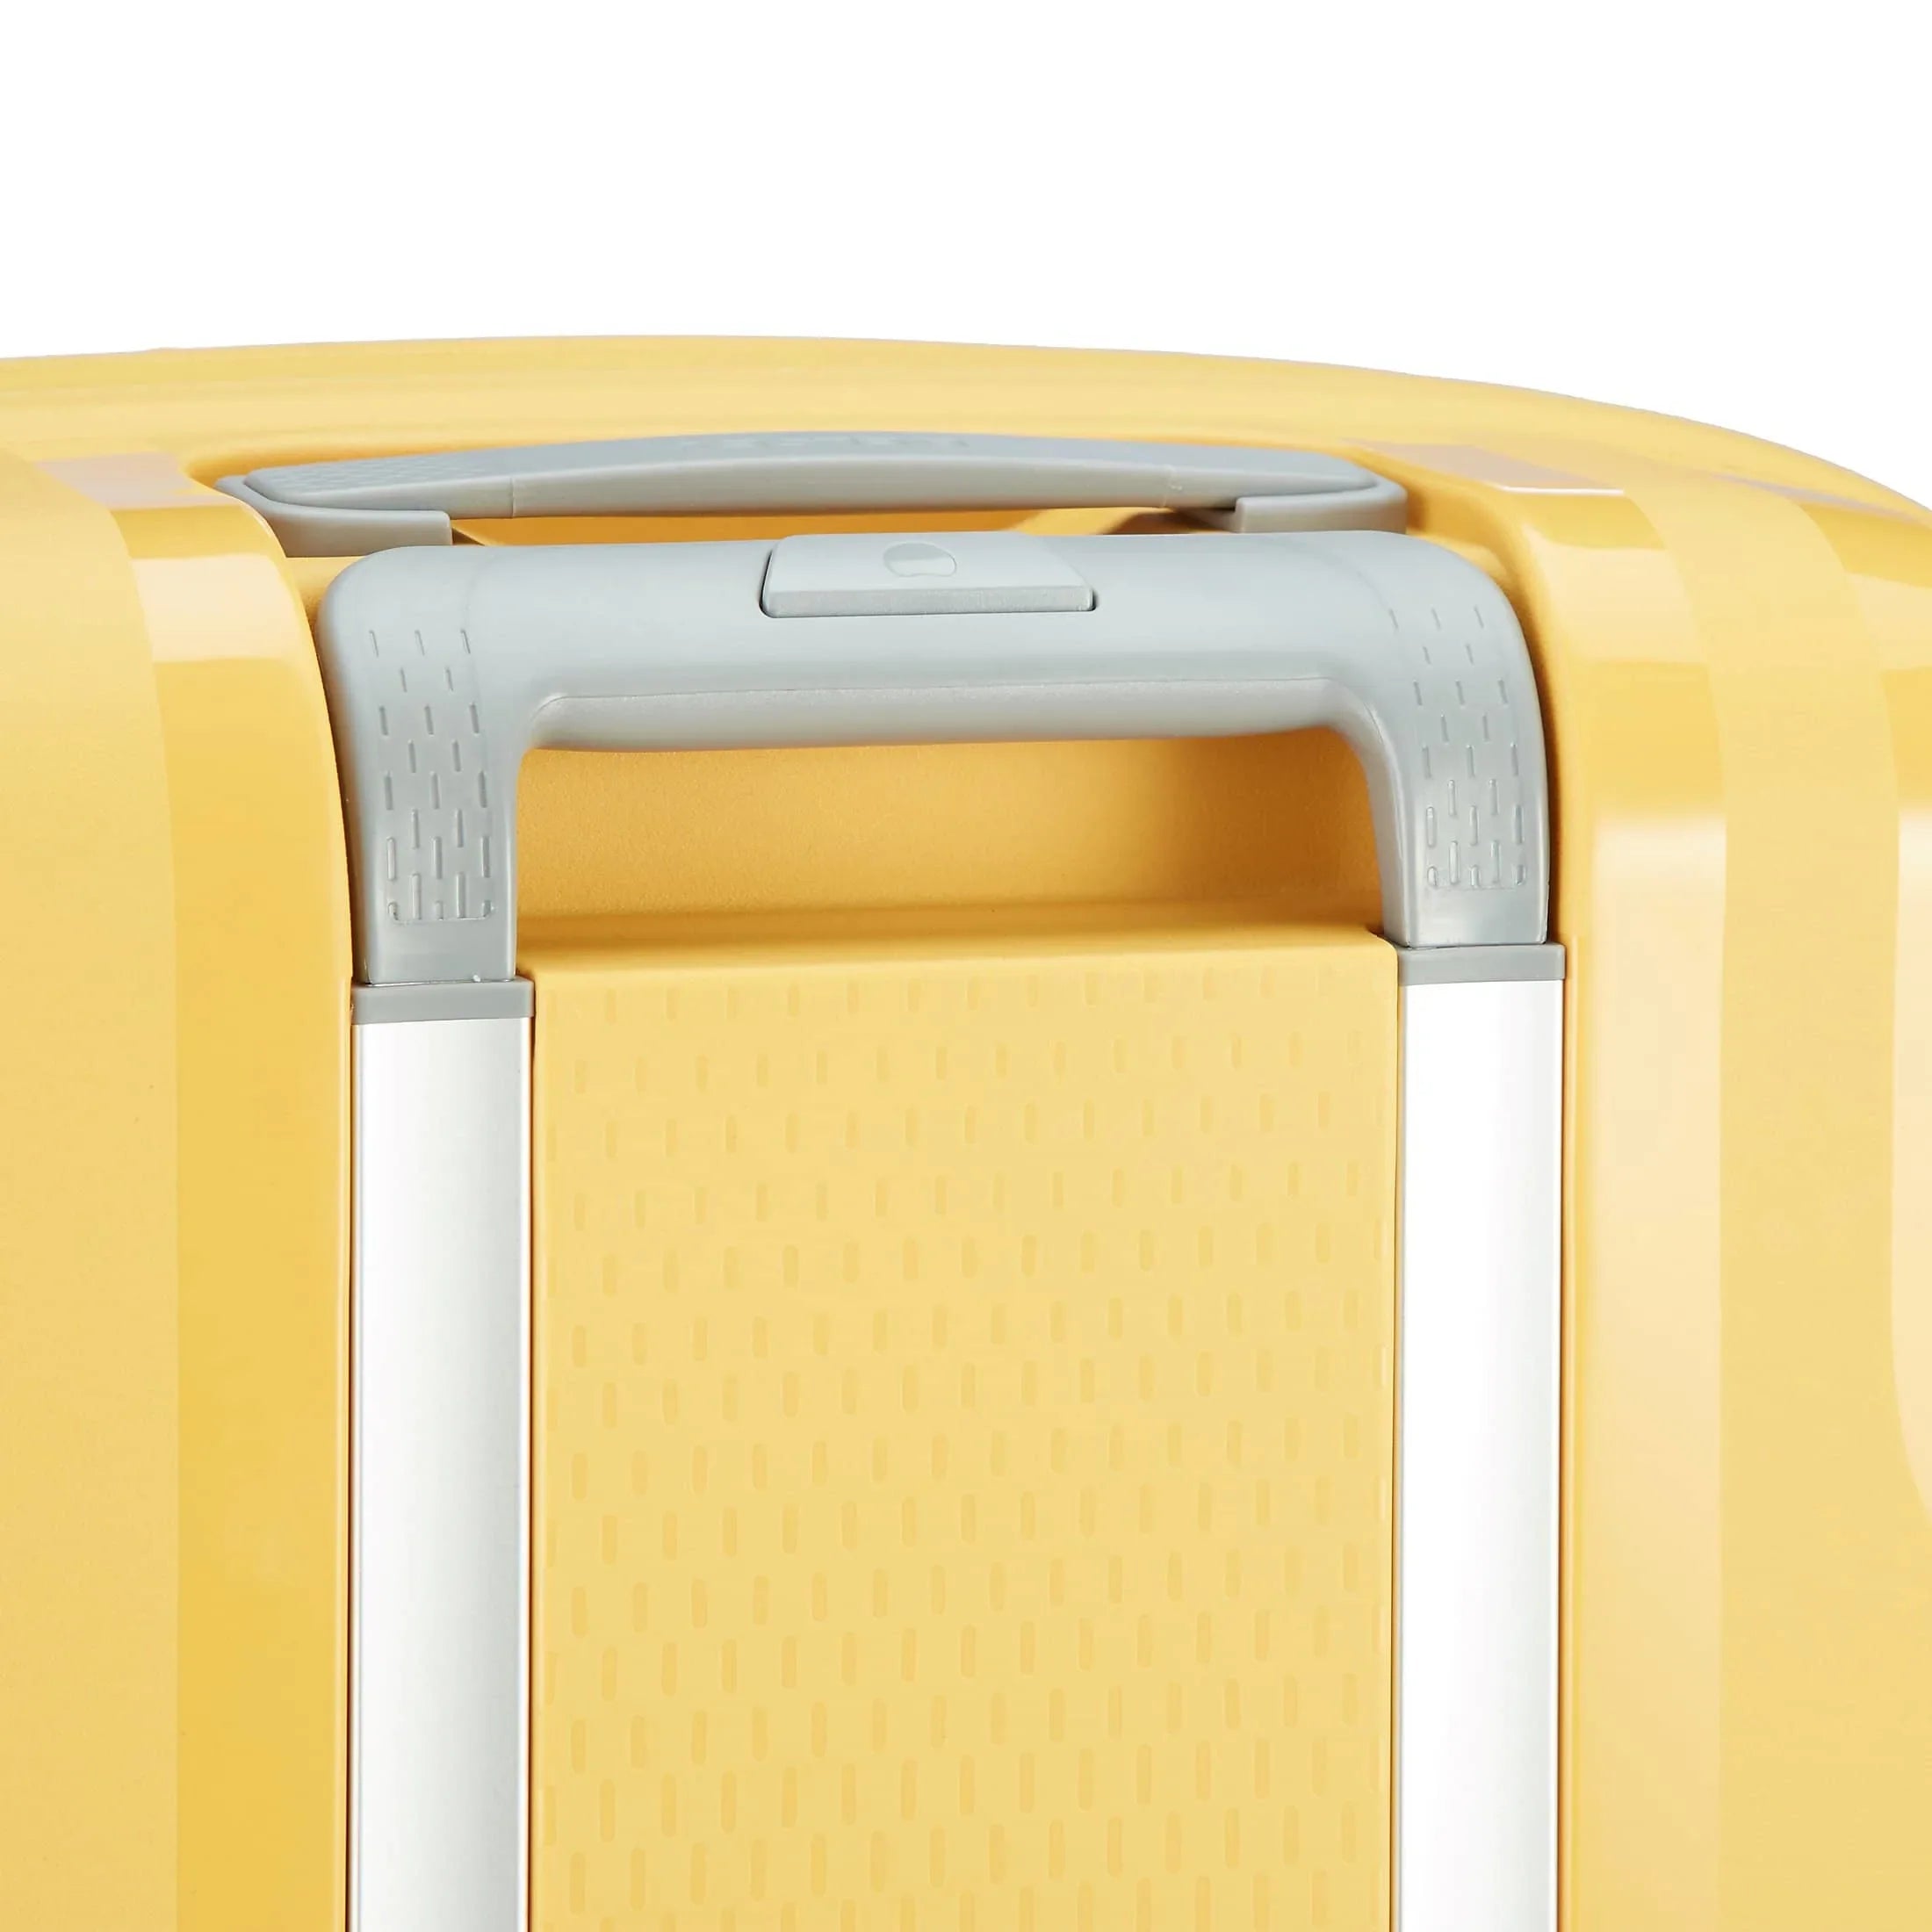 Delsey Clavel trolley 4 roues 76 cm - jaune